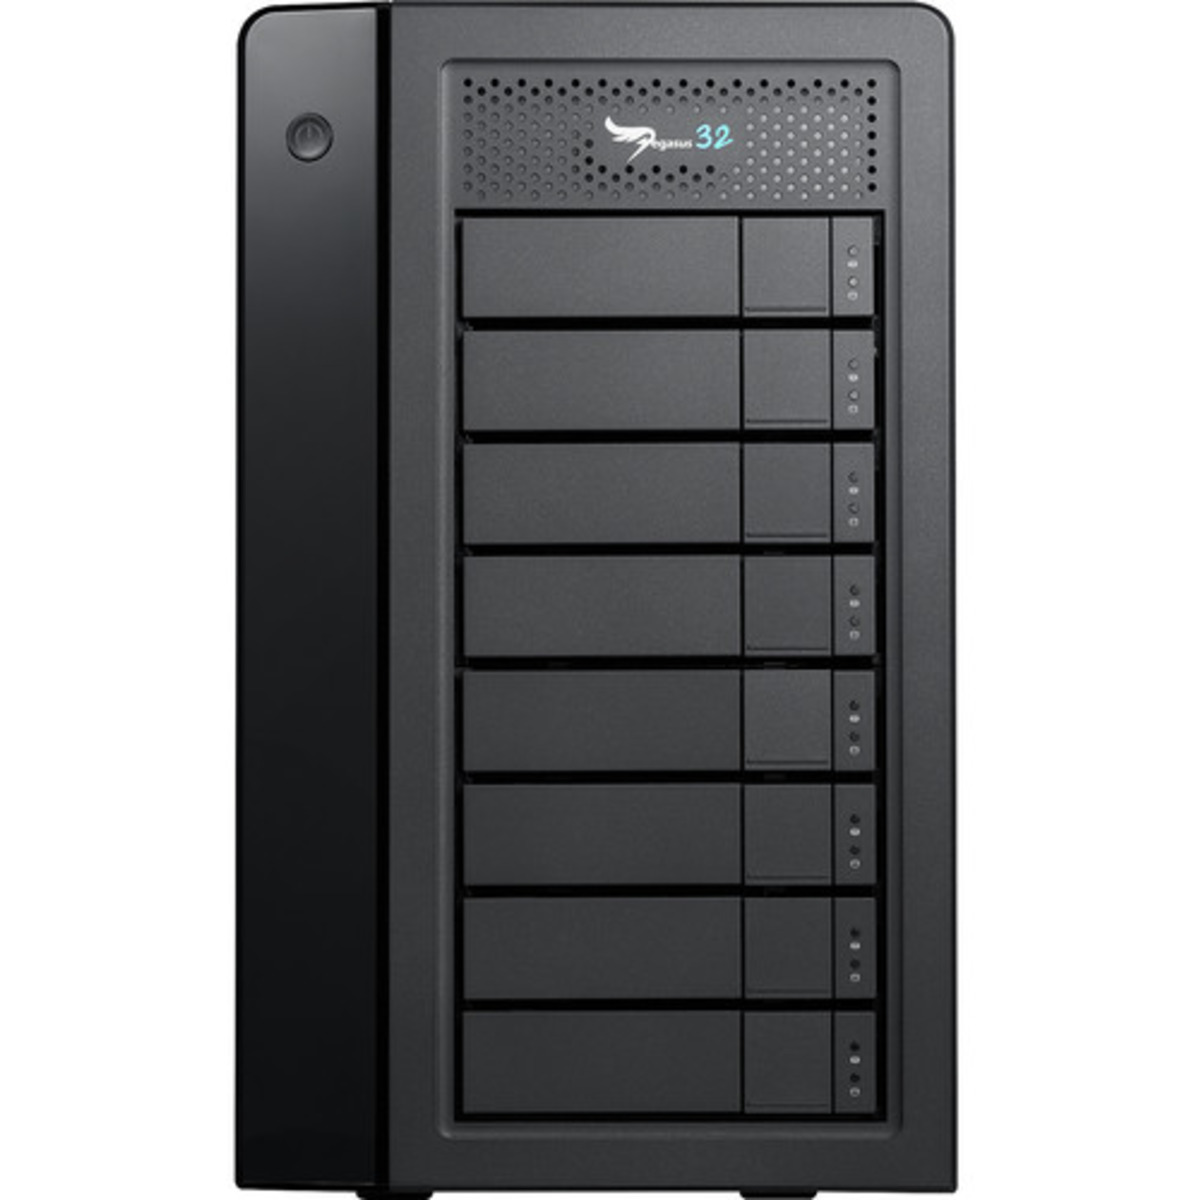 Promise Technology Pegasus32 R8 Thunderbolt 3 12tb 8-Bay Desktop Multimedia / Power User / Business DAS - Direct Attached Storage Device 6x2tb Samsung 870 EVO MZ-77E2T0BAM 2.5 560/530MB/s SATA 6Gb/s SSD CONSUMER Class Drives Installed - Burn-In Tested - ON SALE Pegasus32 R8 Thunderbolt 3